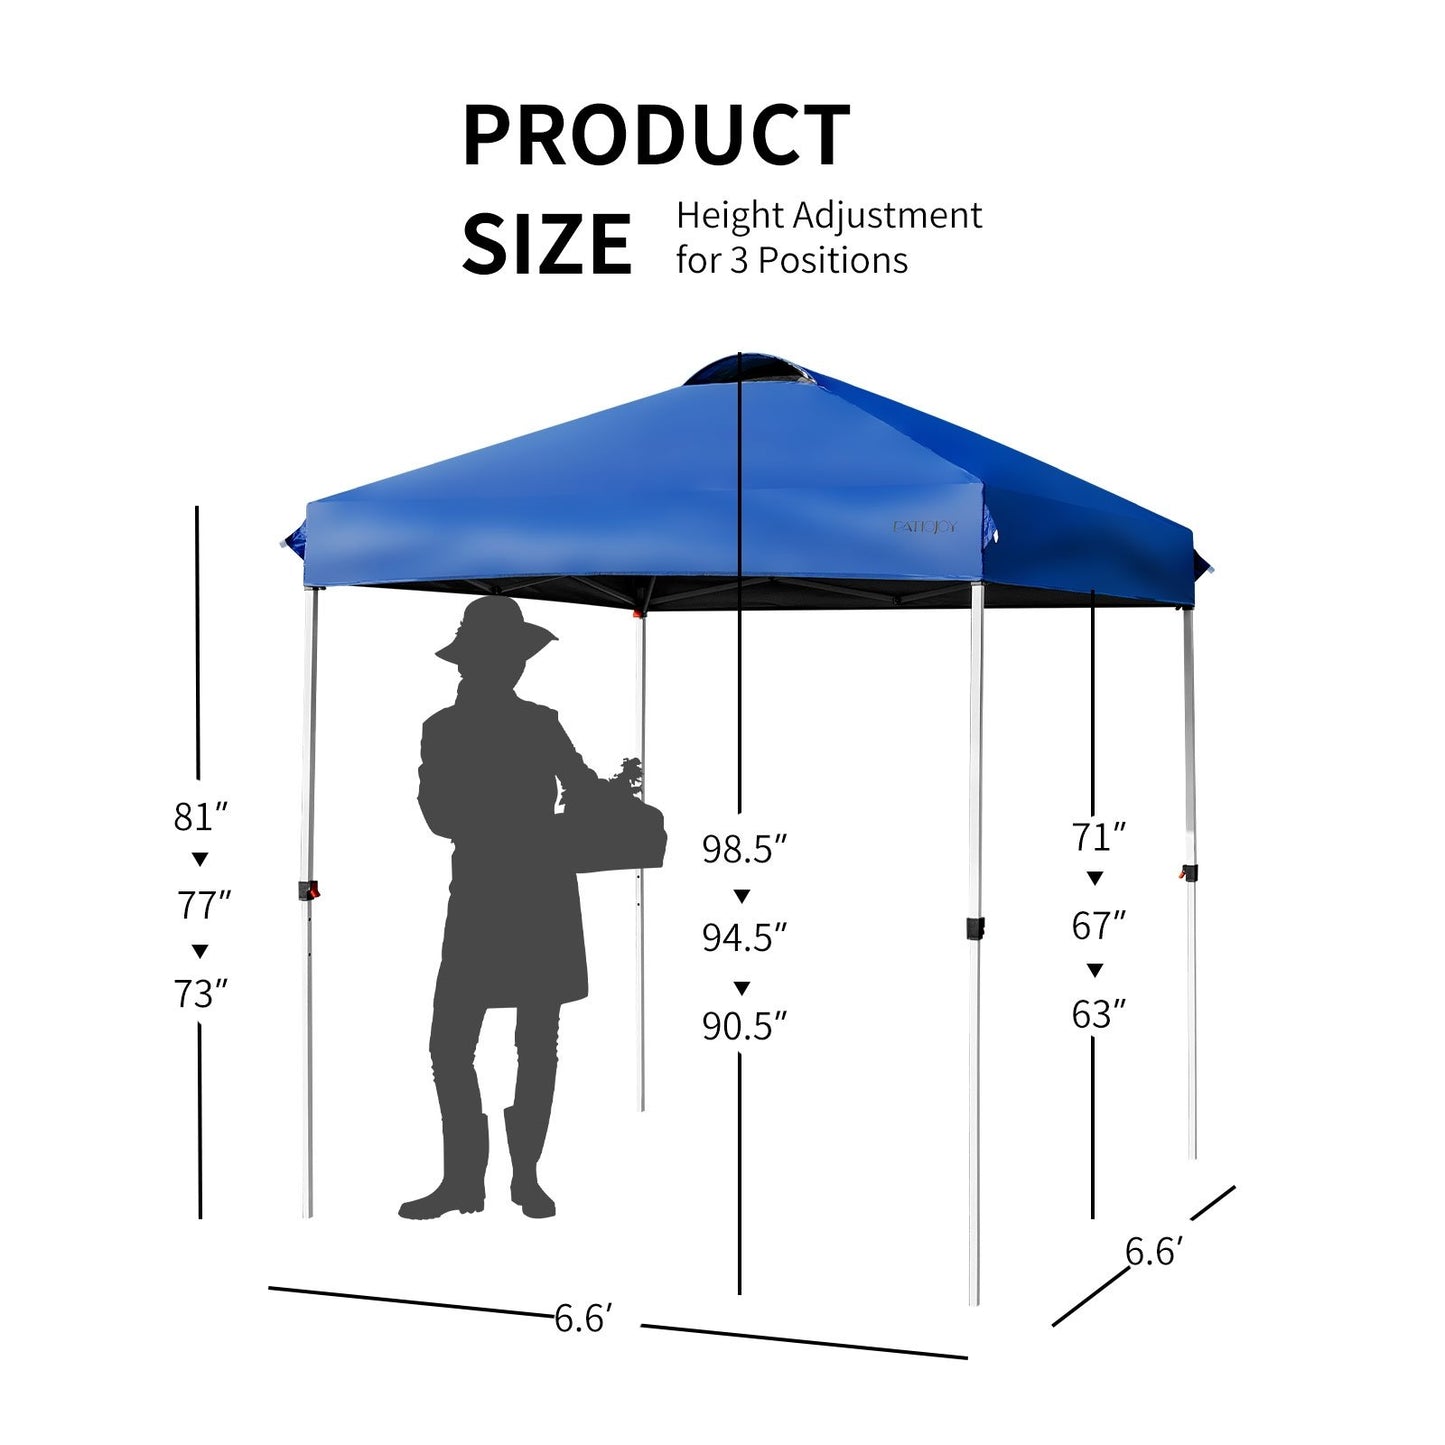 6.6 x 6.6 Feet Outdoor Pop-up Canopy Tent with Roller Bag, Blue